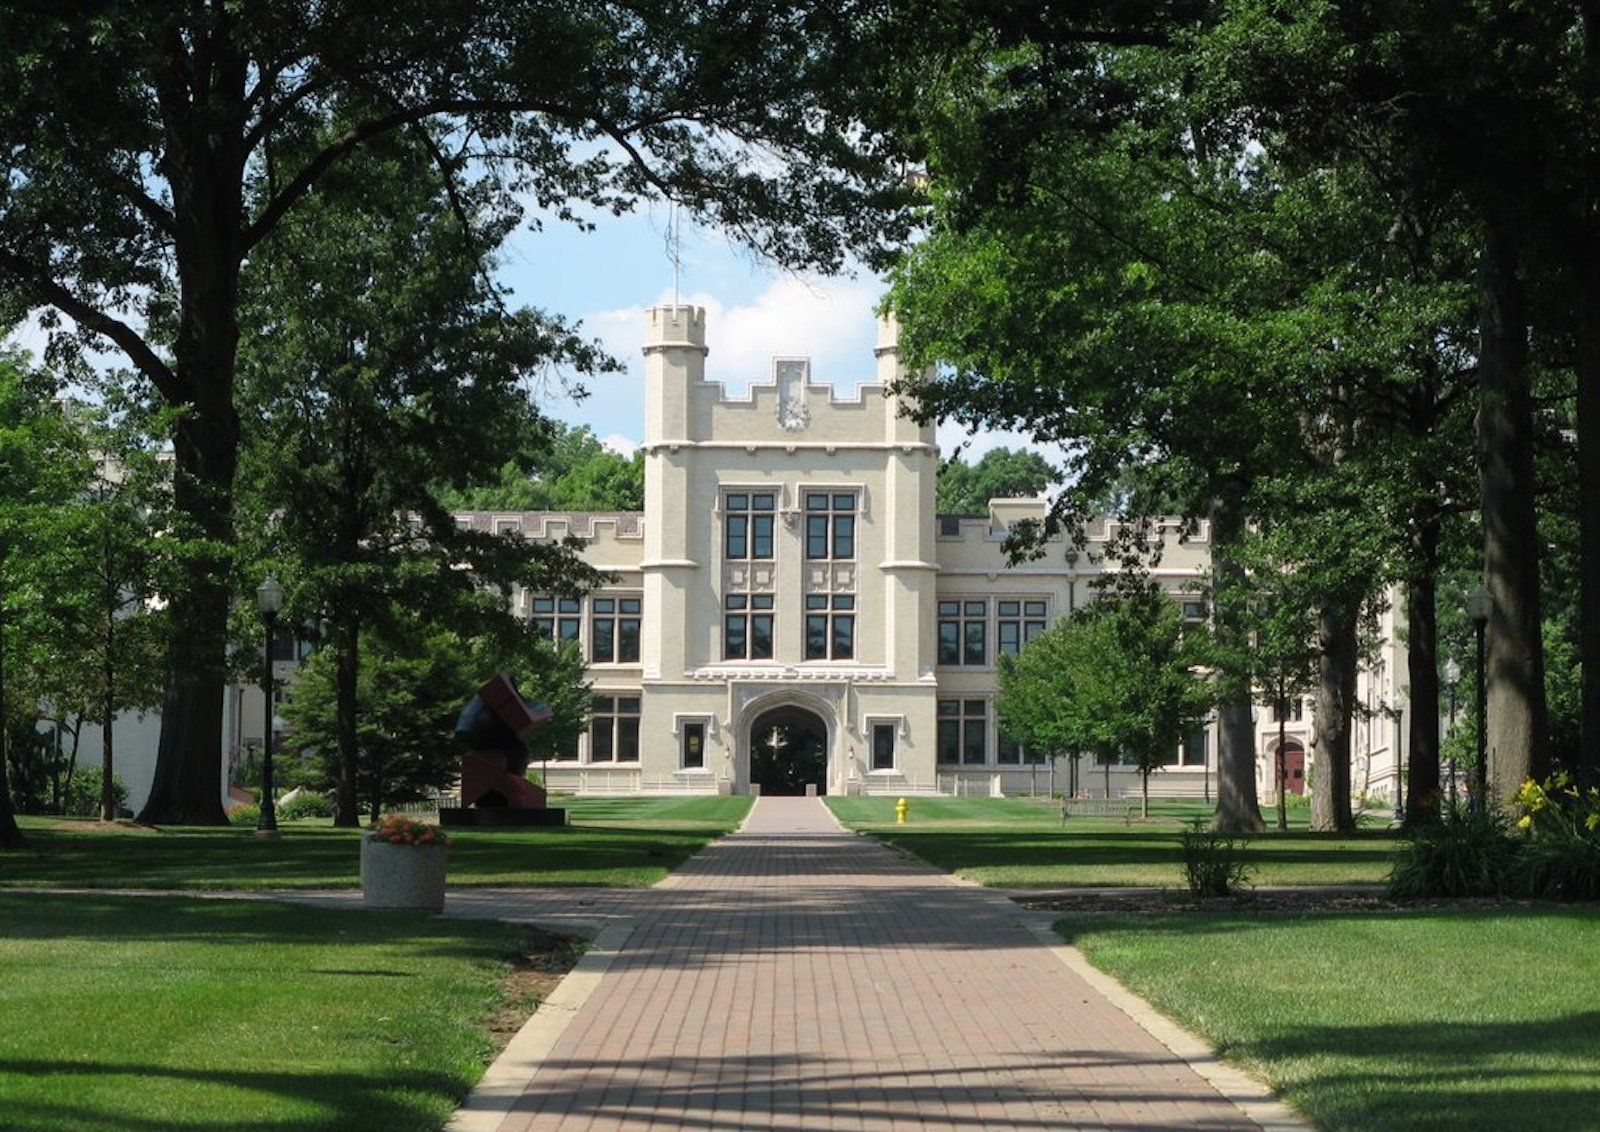 An Encounter with College of Wooster